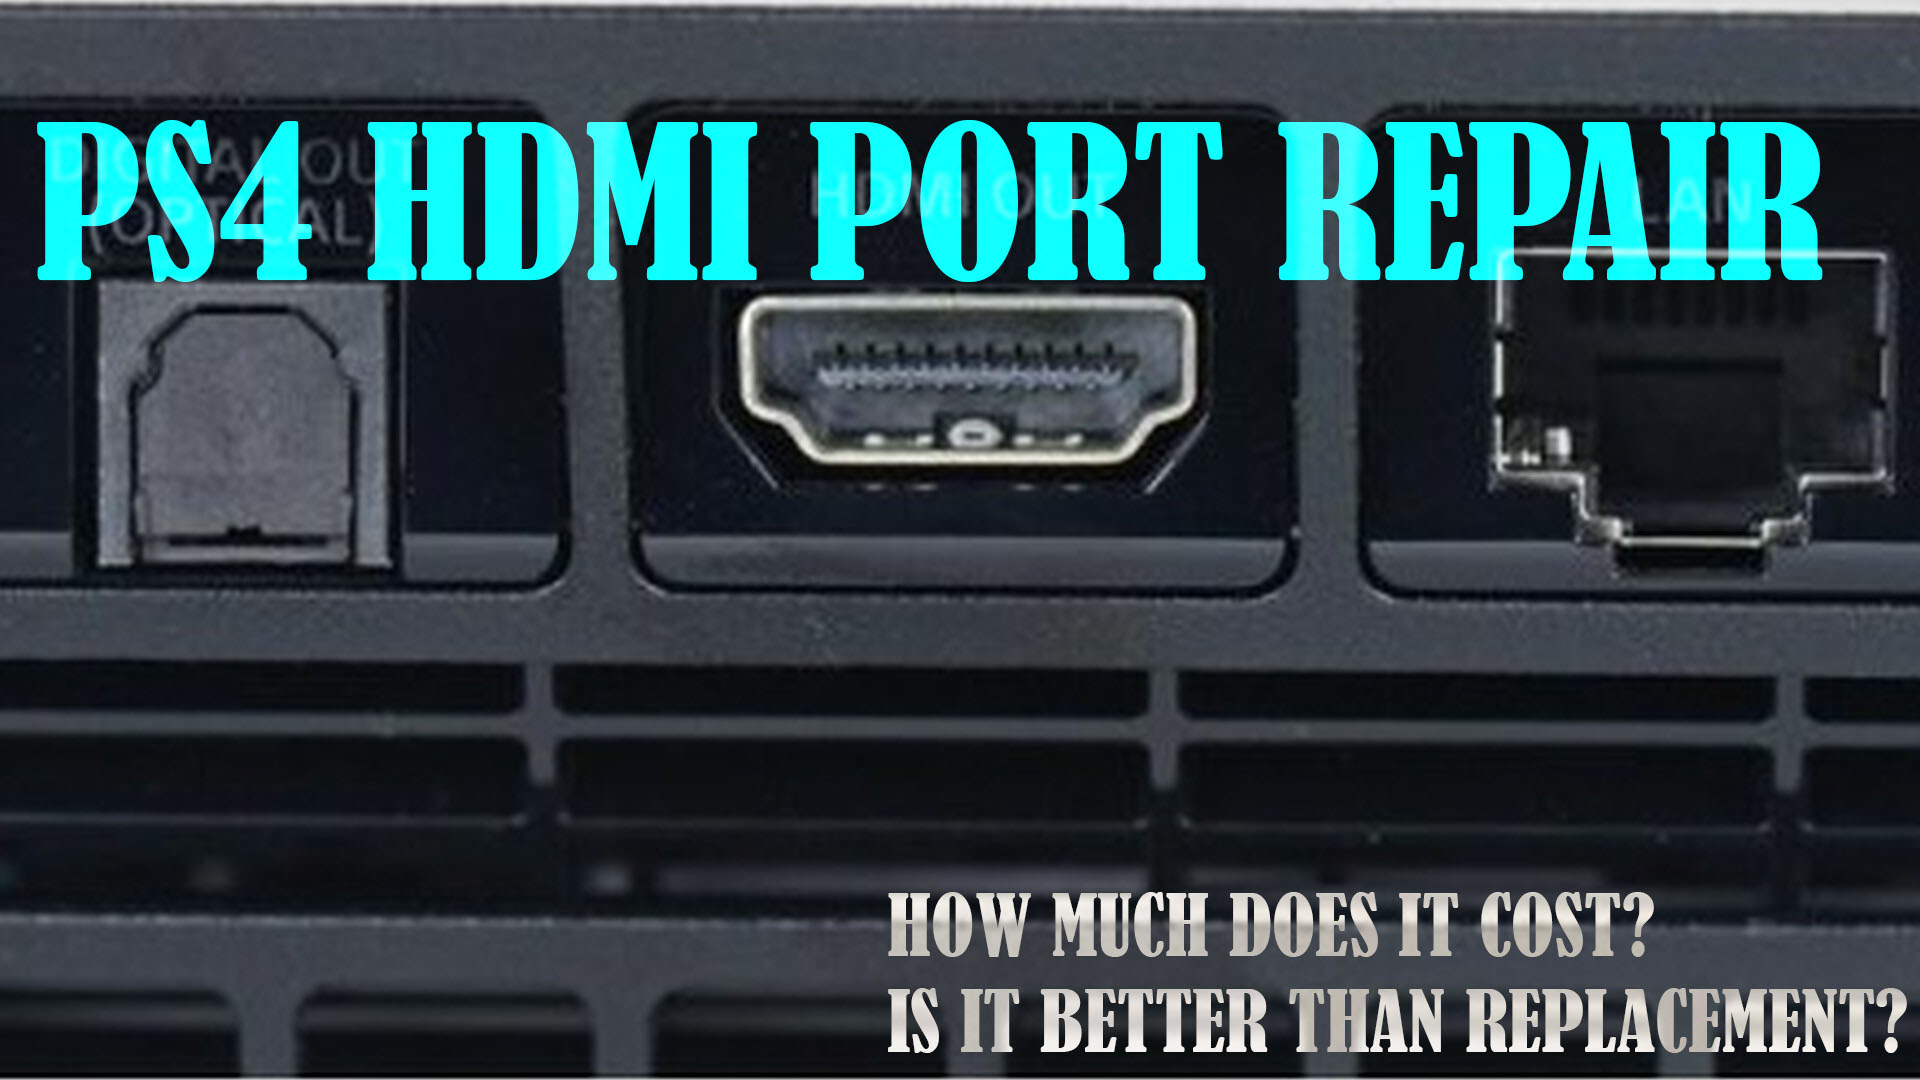 https://thedroidguy.com/wp-content/uploads/2021/08/PS4-hdmi-port-repair-overview-cost.jpg